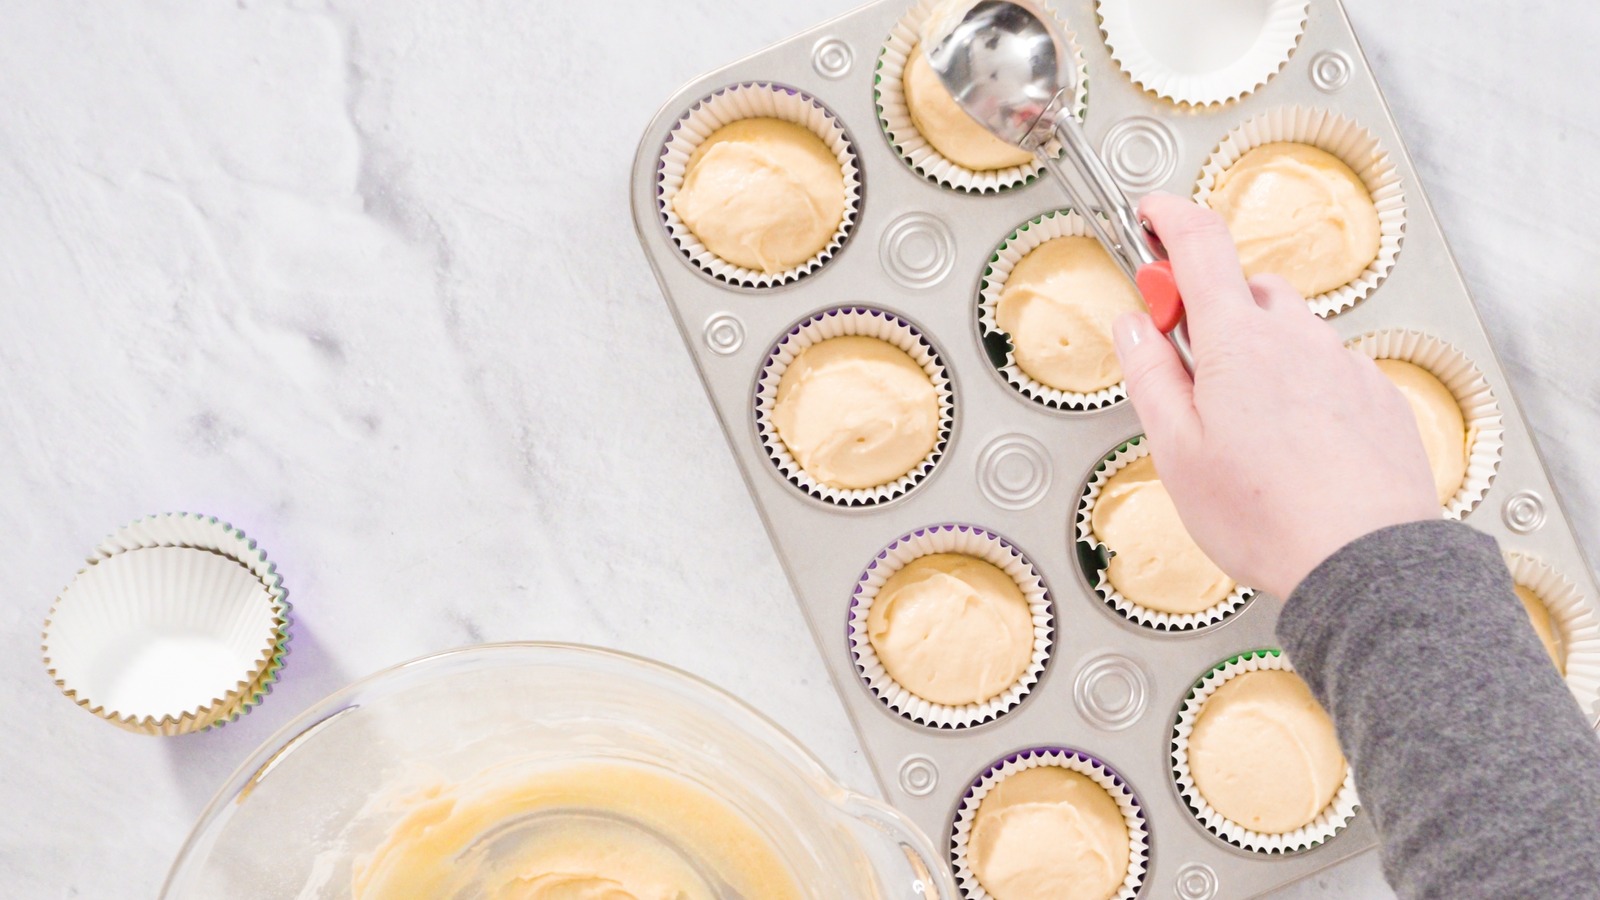 https://www.tastingtable.com/img/gallery/can-you-fill-cupcakes-before-they-go-into-the-oven/l-intro-1673899727.jpg